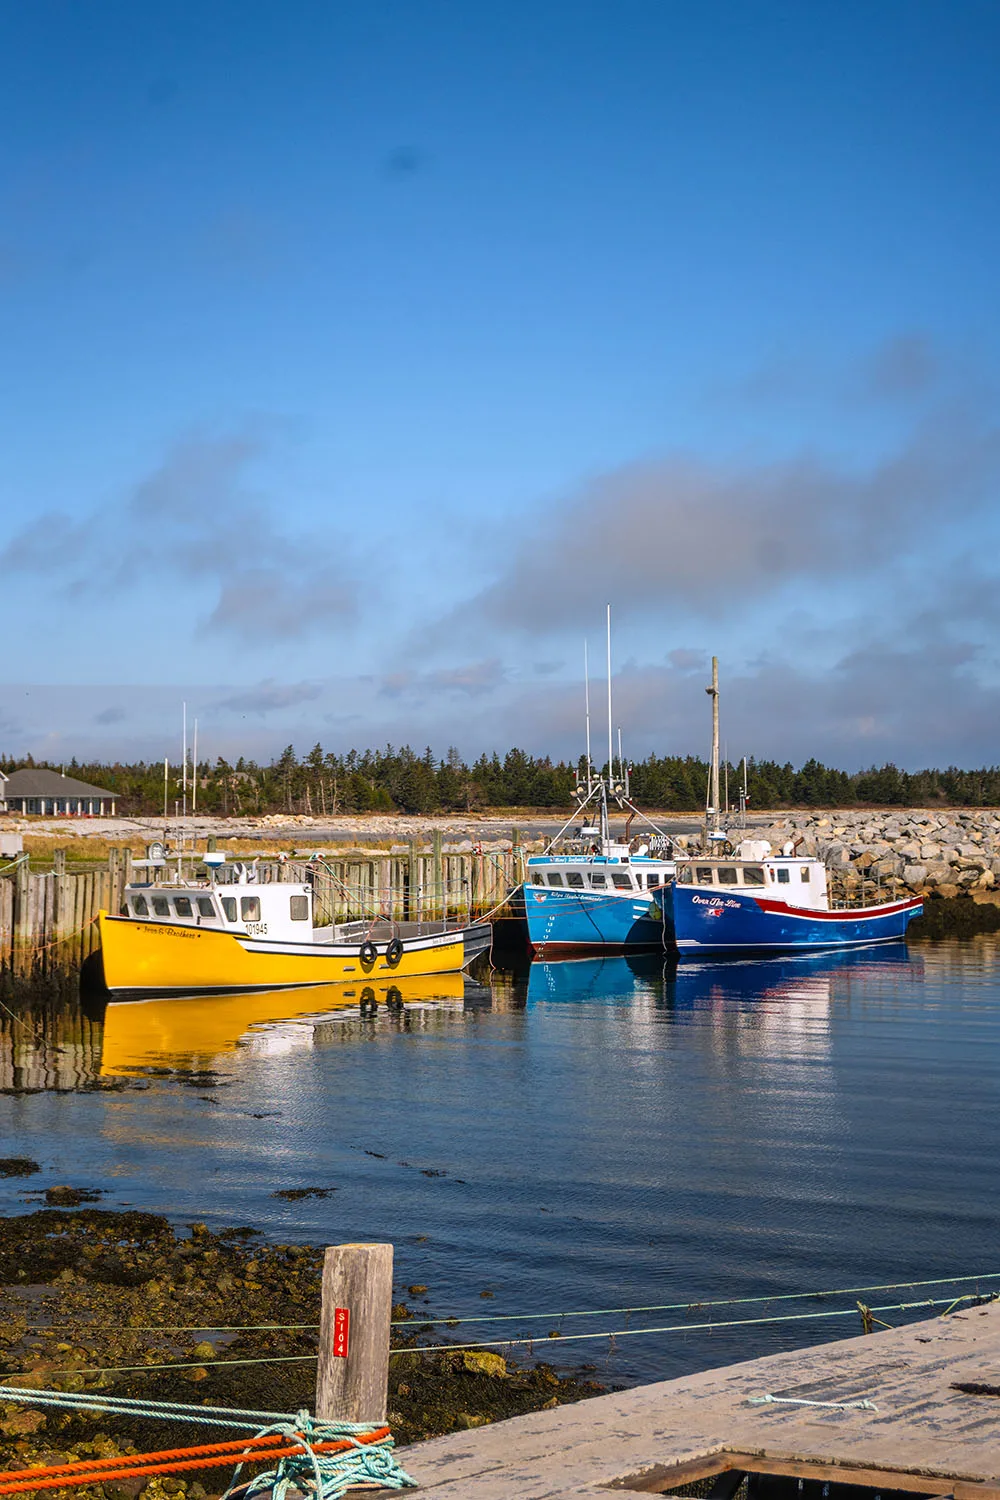 Shelburne County, Nova Scotia is an absolutely charming Canadian destination with so much to offer. Here you’ll find the most amazing seafood, incredible beaches, adorable lighthouses, seaside cottages, and the friendliest of locals. If you’re planning a trip to Shelburne County soon, this guide to the best things to do in Shelburne County is for you! This guide covers everything to do in Shelburne County, from Barrington to Shelburne, and beautiful Lockeport. Pictured here: View on the way to Cape Sable Island from Barrington